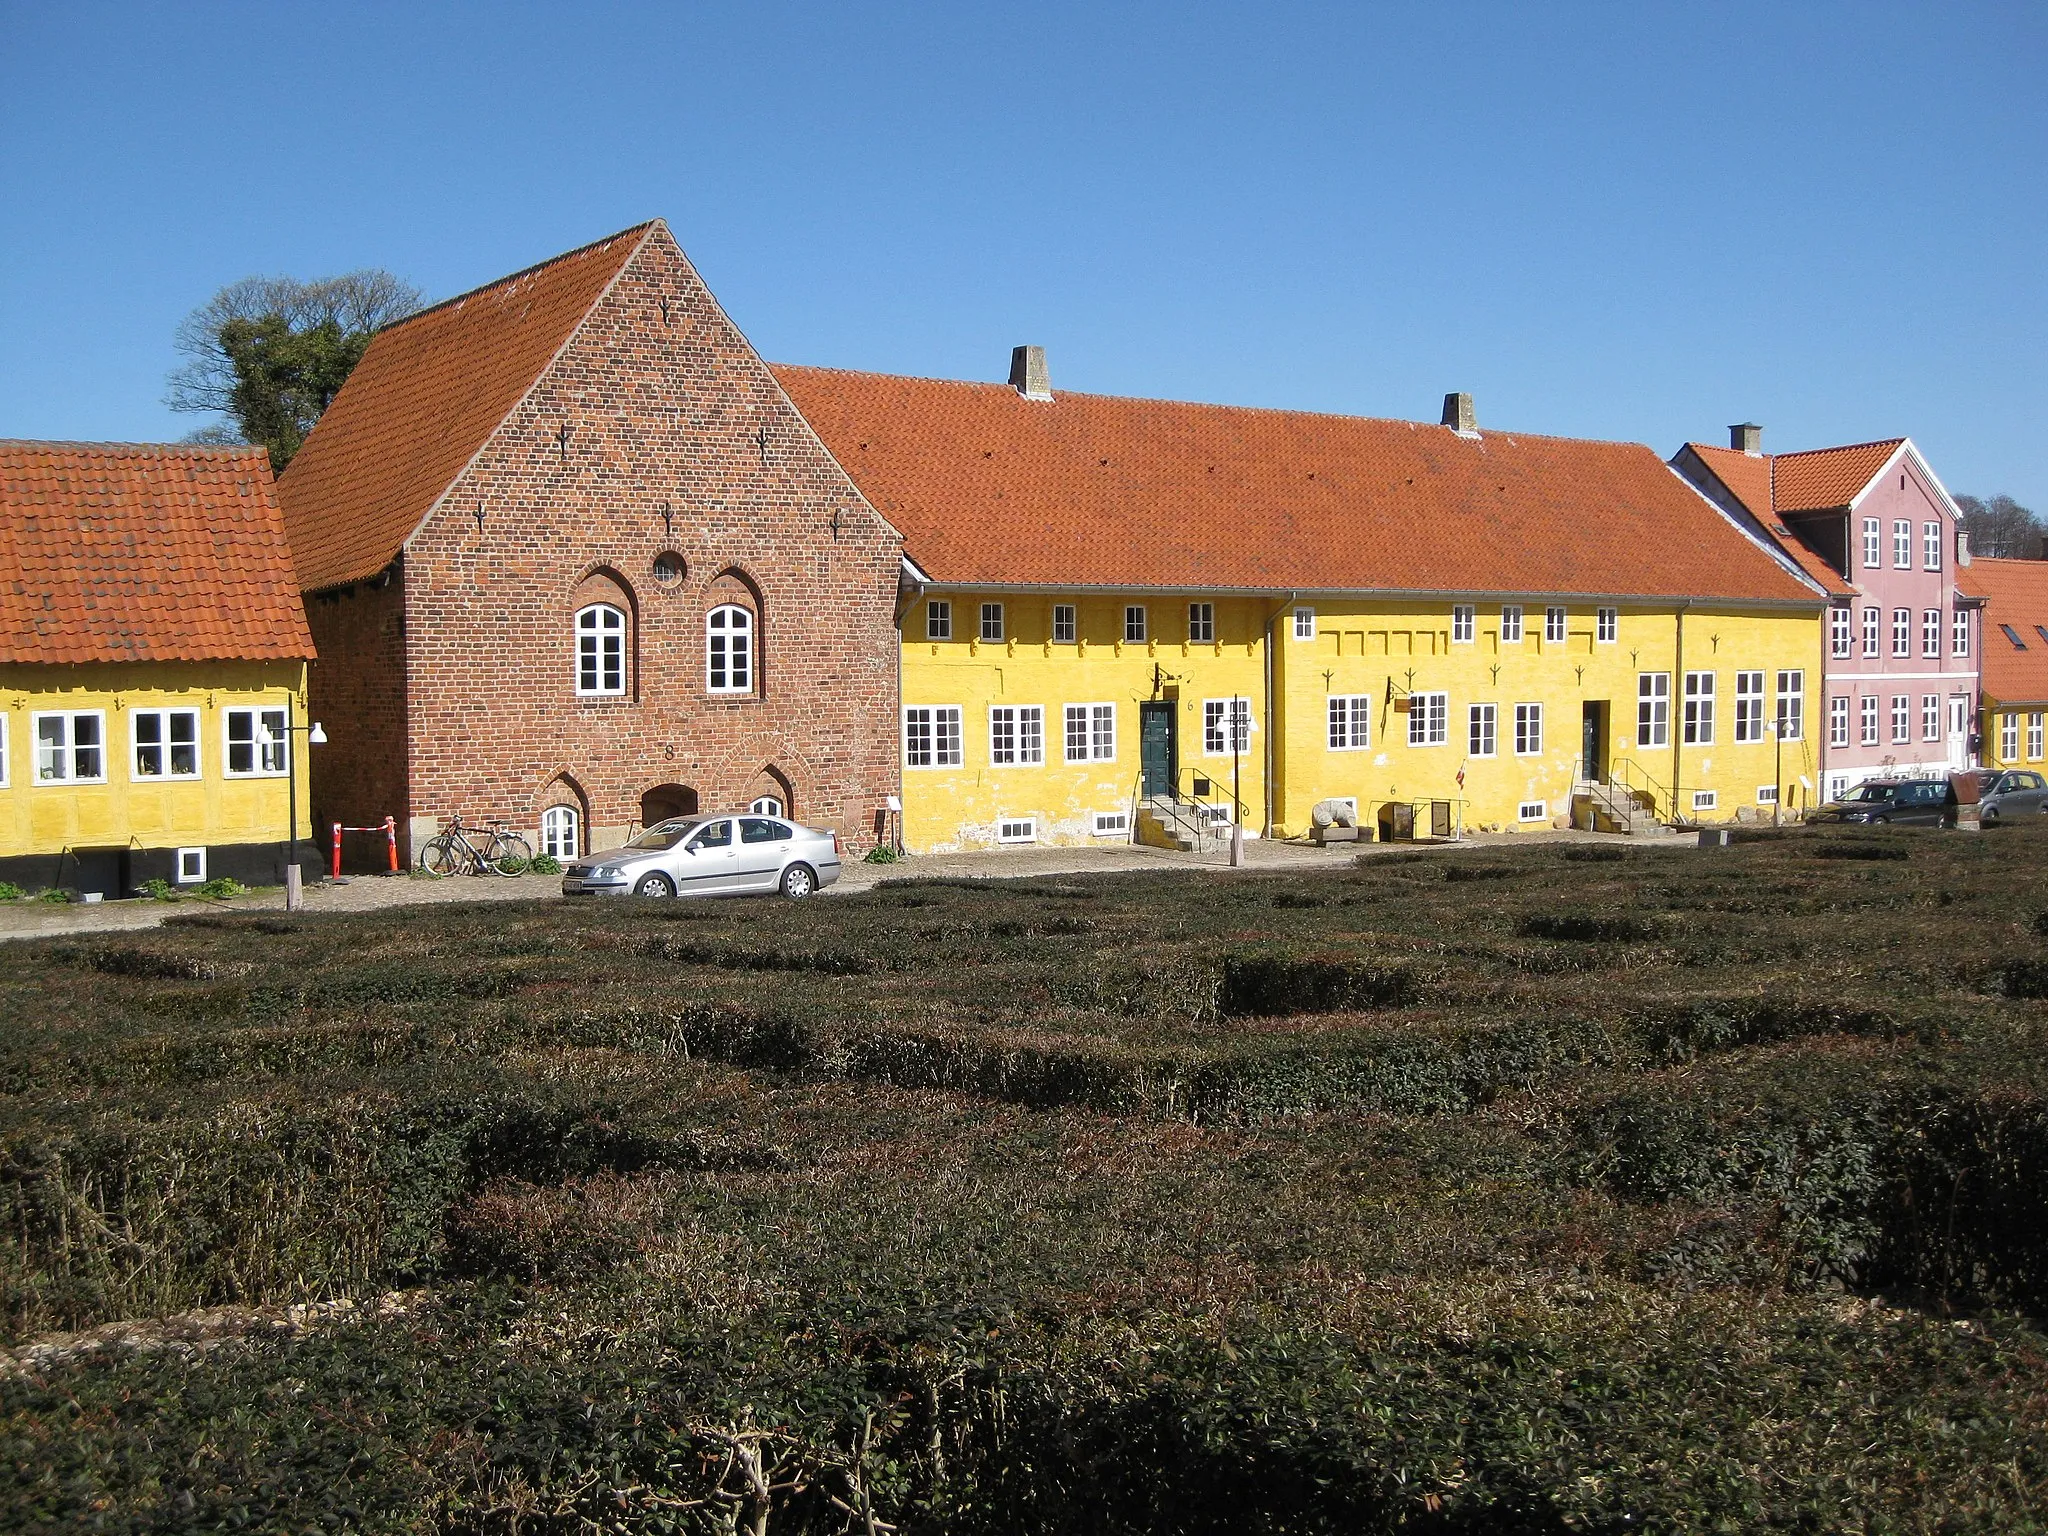 Photo showing: The old "Bispegaarden" (bishop´s palace) in the town Kalundborg. The town is located in West Zealand, Denmark.